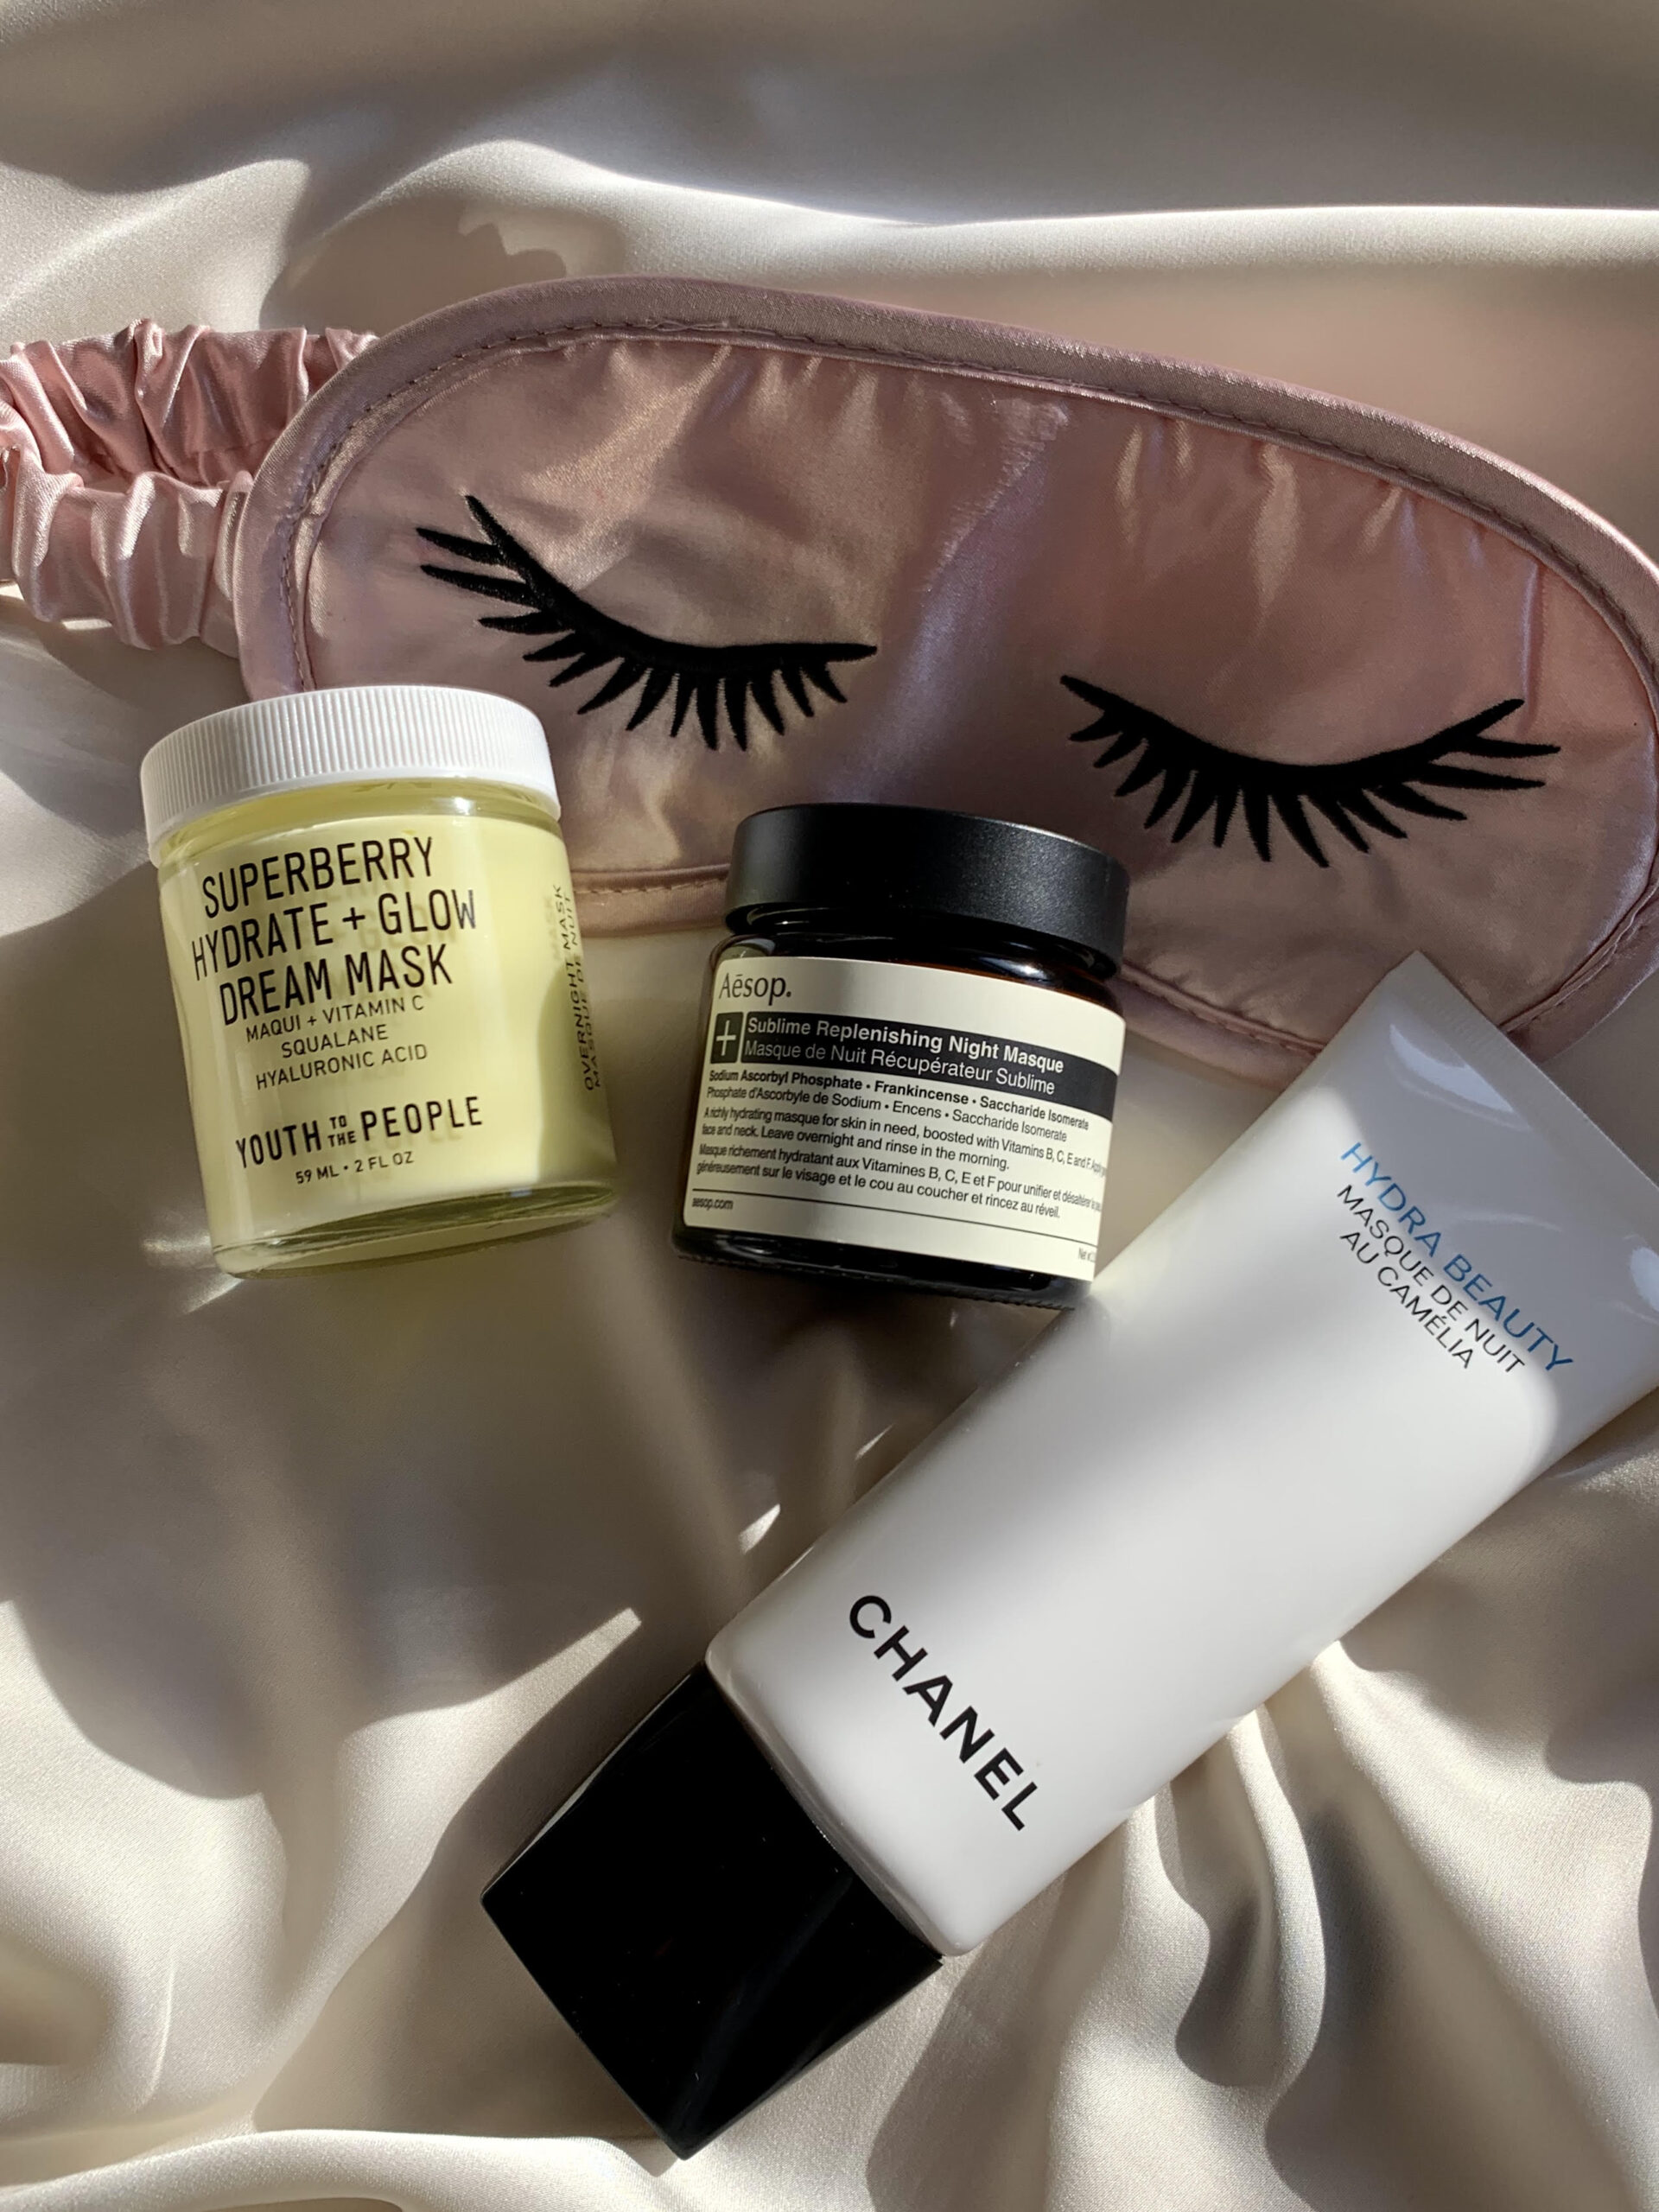 Natmasker, natcreme, Aesop, Chanel, Youth to the people